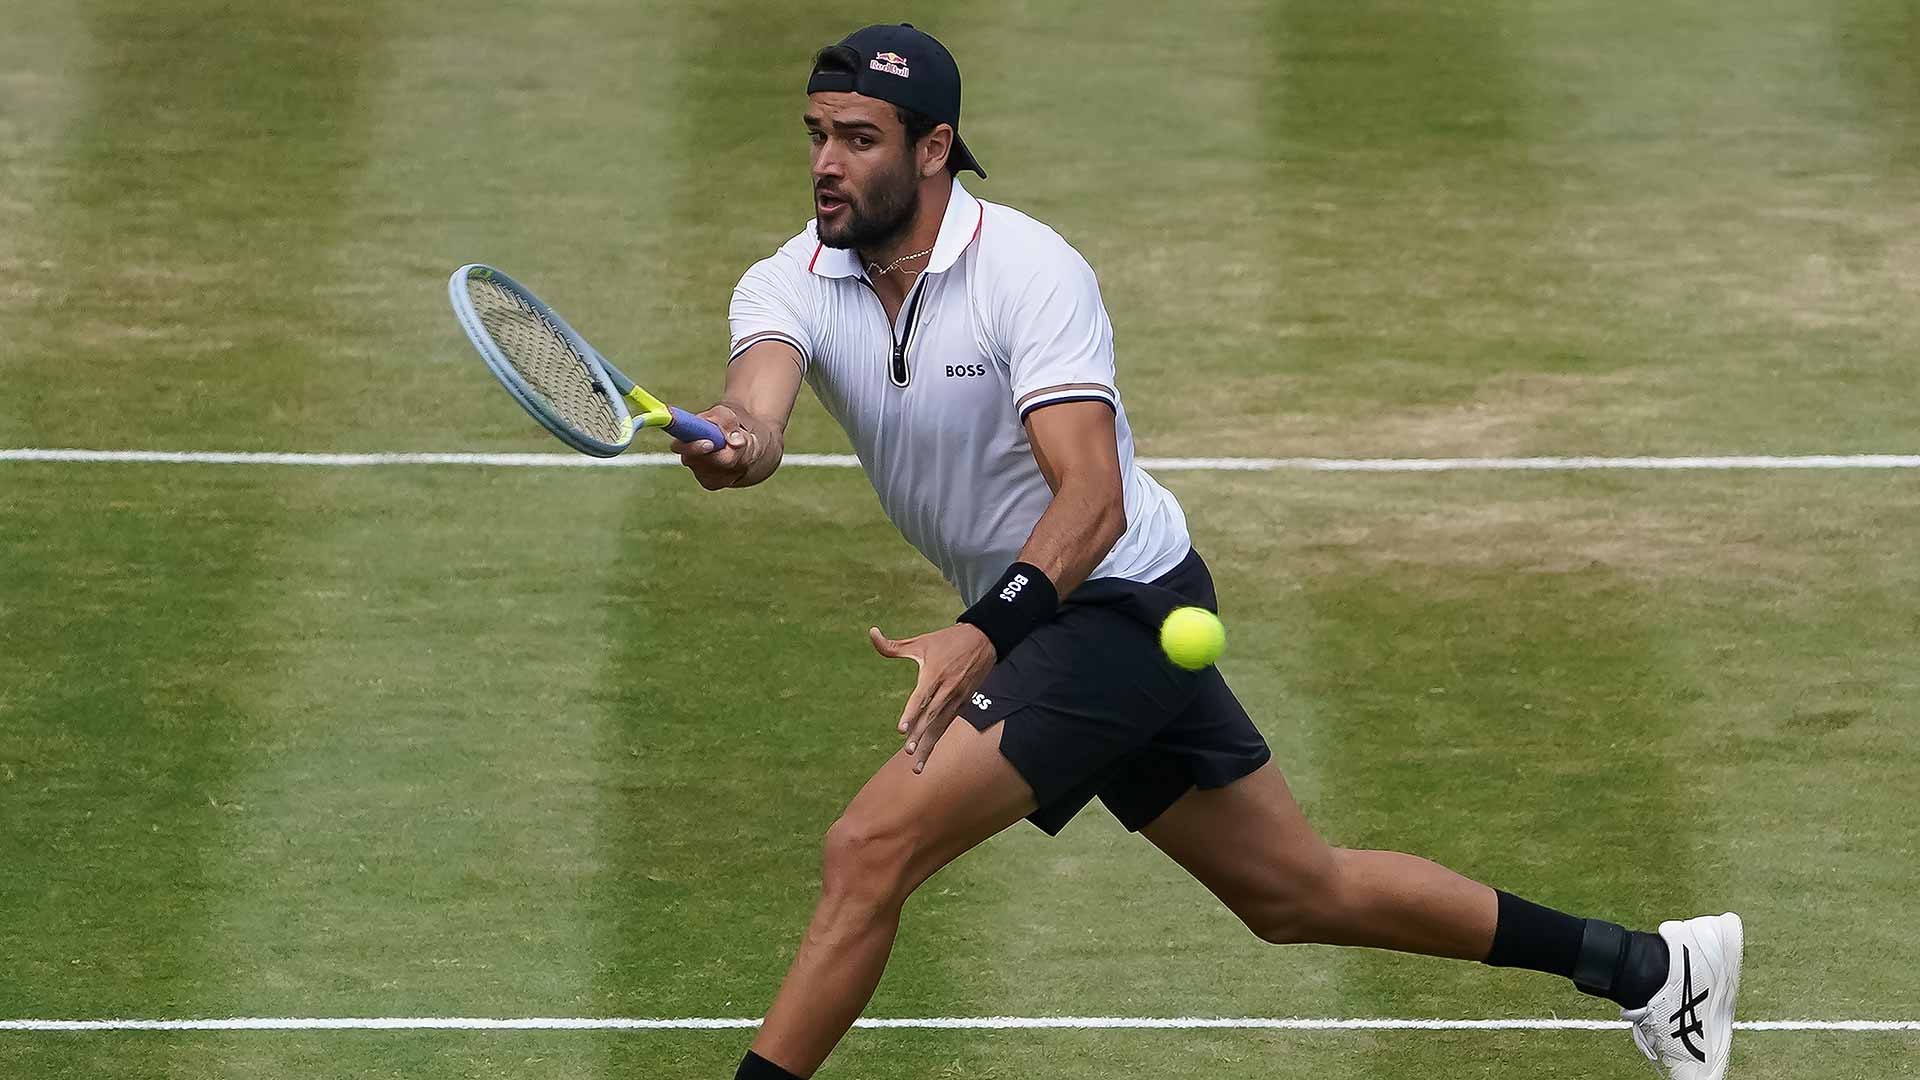 Matteo Berrettini On Collision Course With Andy Murray and Stan Wawrinka At Queens Club ATP Tour Tennis